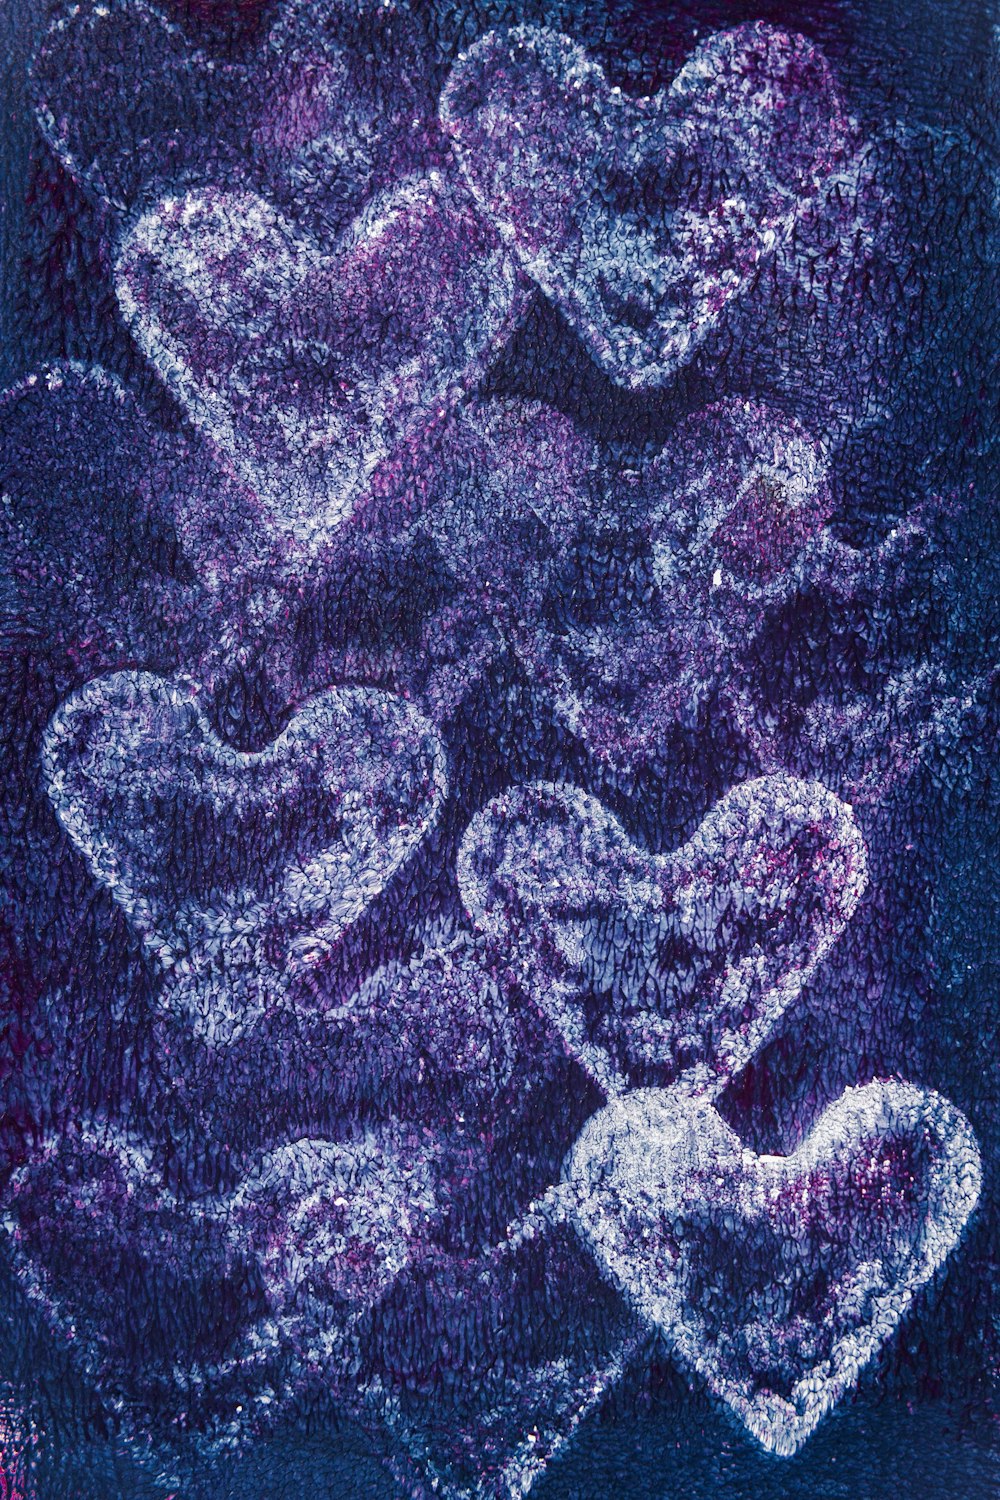 a painting of hearts on a blue background